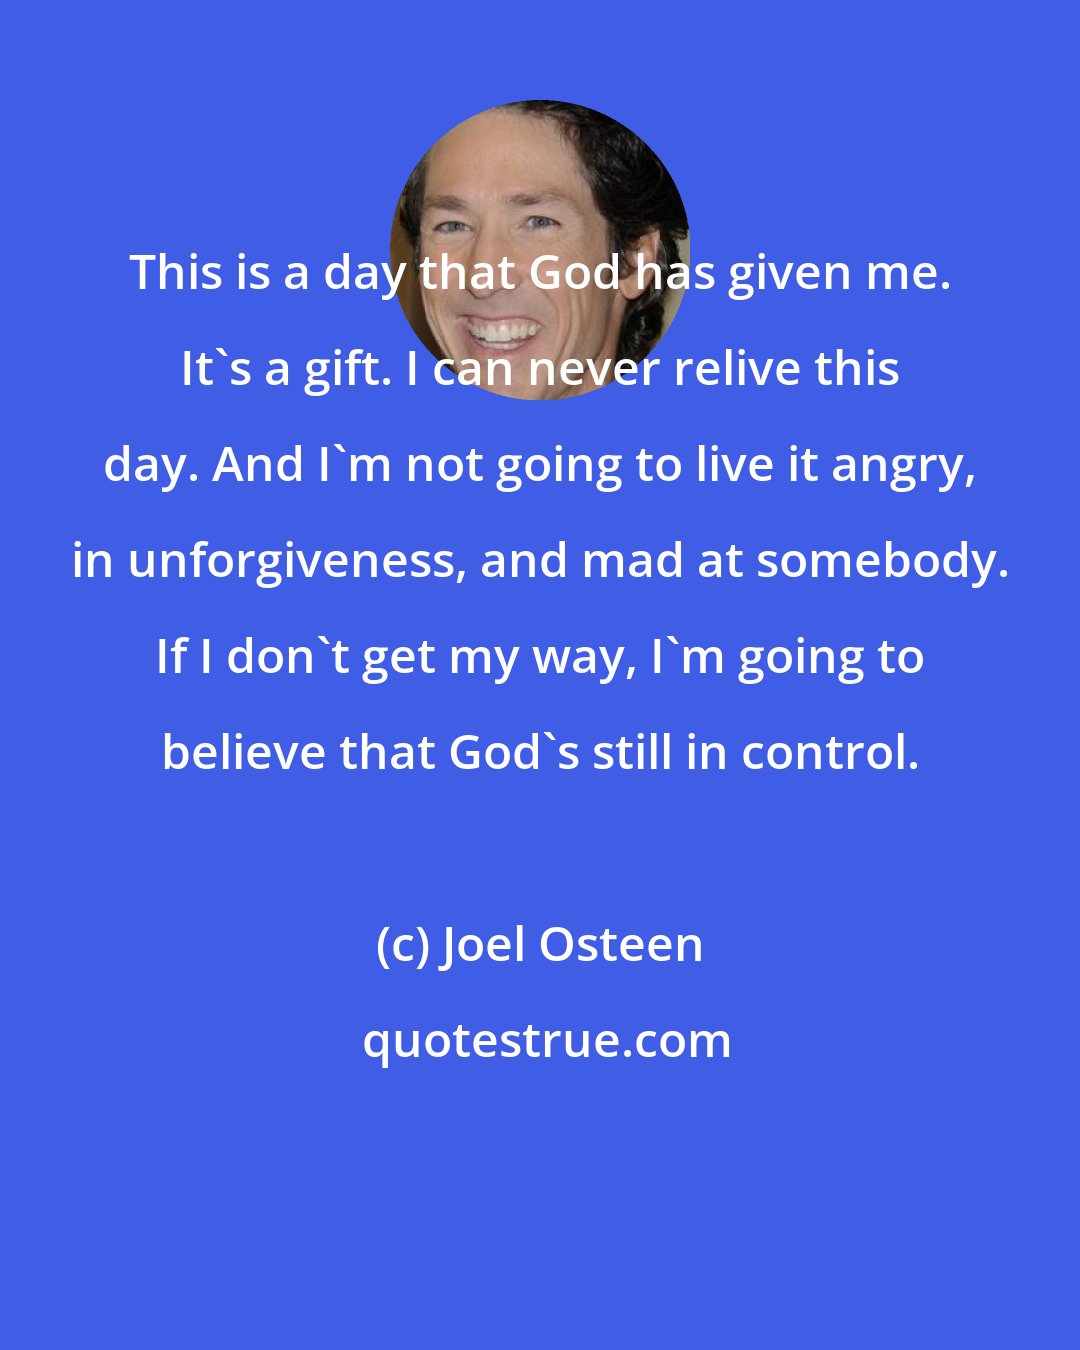 Joel Osteen: This is a day that God has given me. It's a gift. I can never relive this day. And I'm not going to live it angry, in unforgiveness, and mad at somebody. If I don't get my way, I'm going to believe that God's still in control.